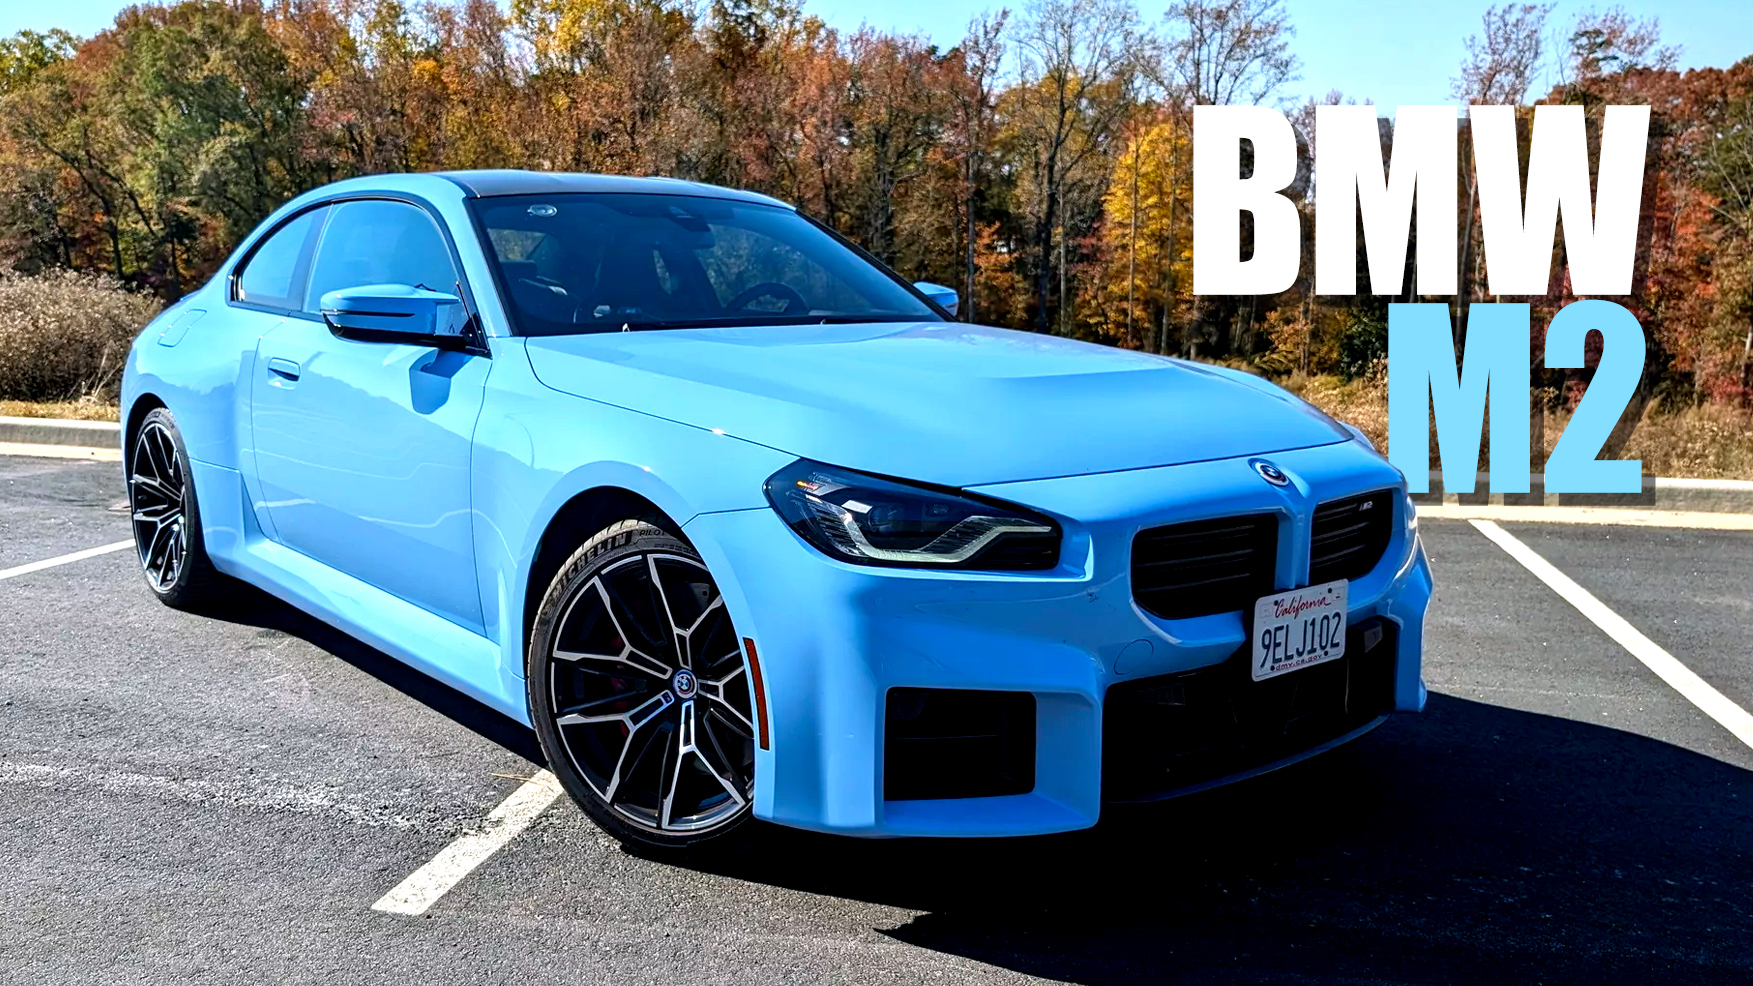 Review: The BMW M2 Is A Dinosaur That's Heaps Of Fun To Drive